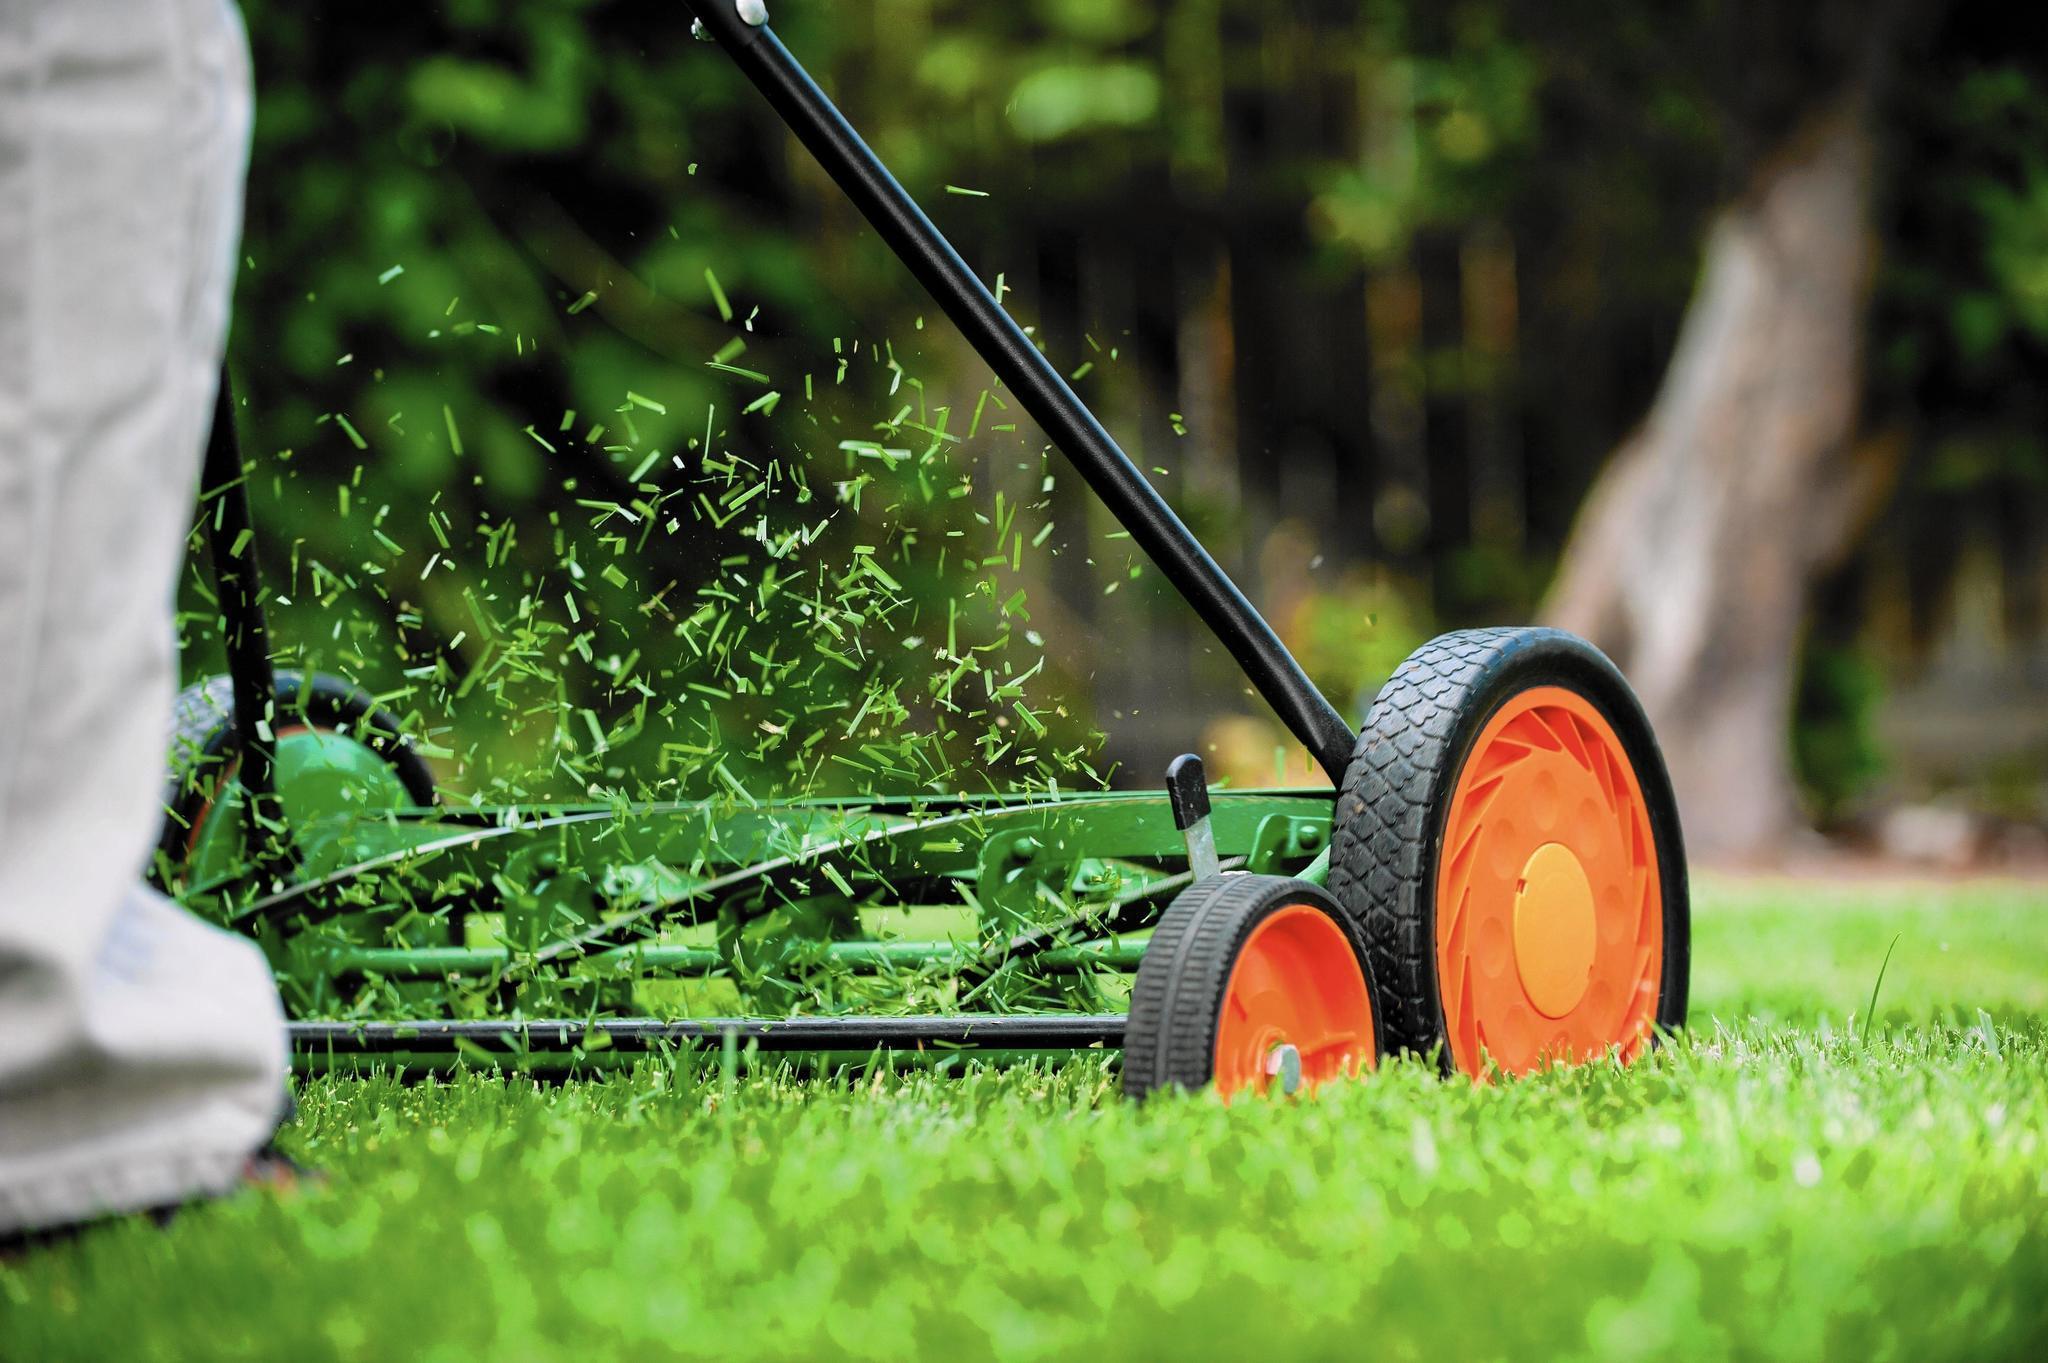 Fertilize your lawn for free with grass clippings - Chicago Tribune